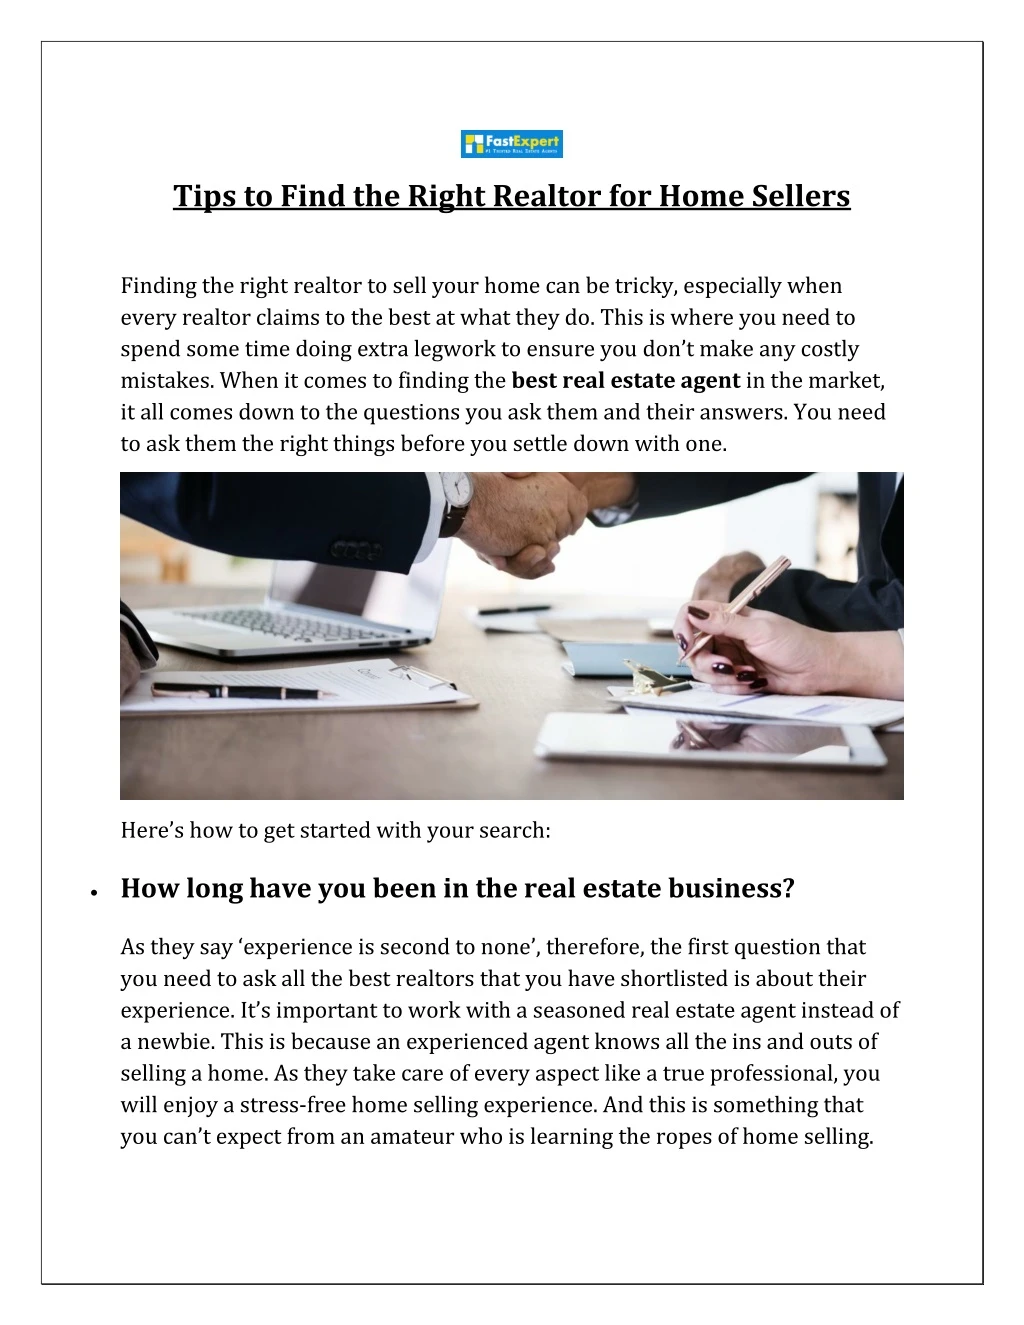 tips to find the right realtor for home sellers